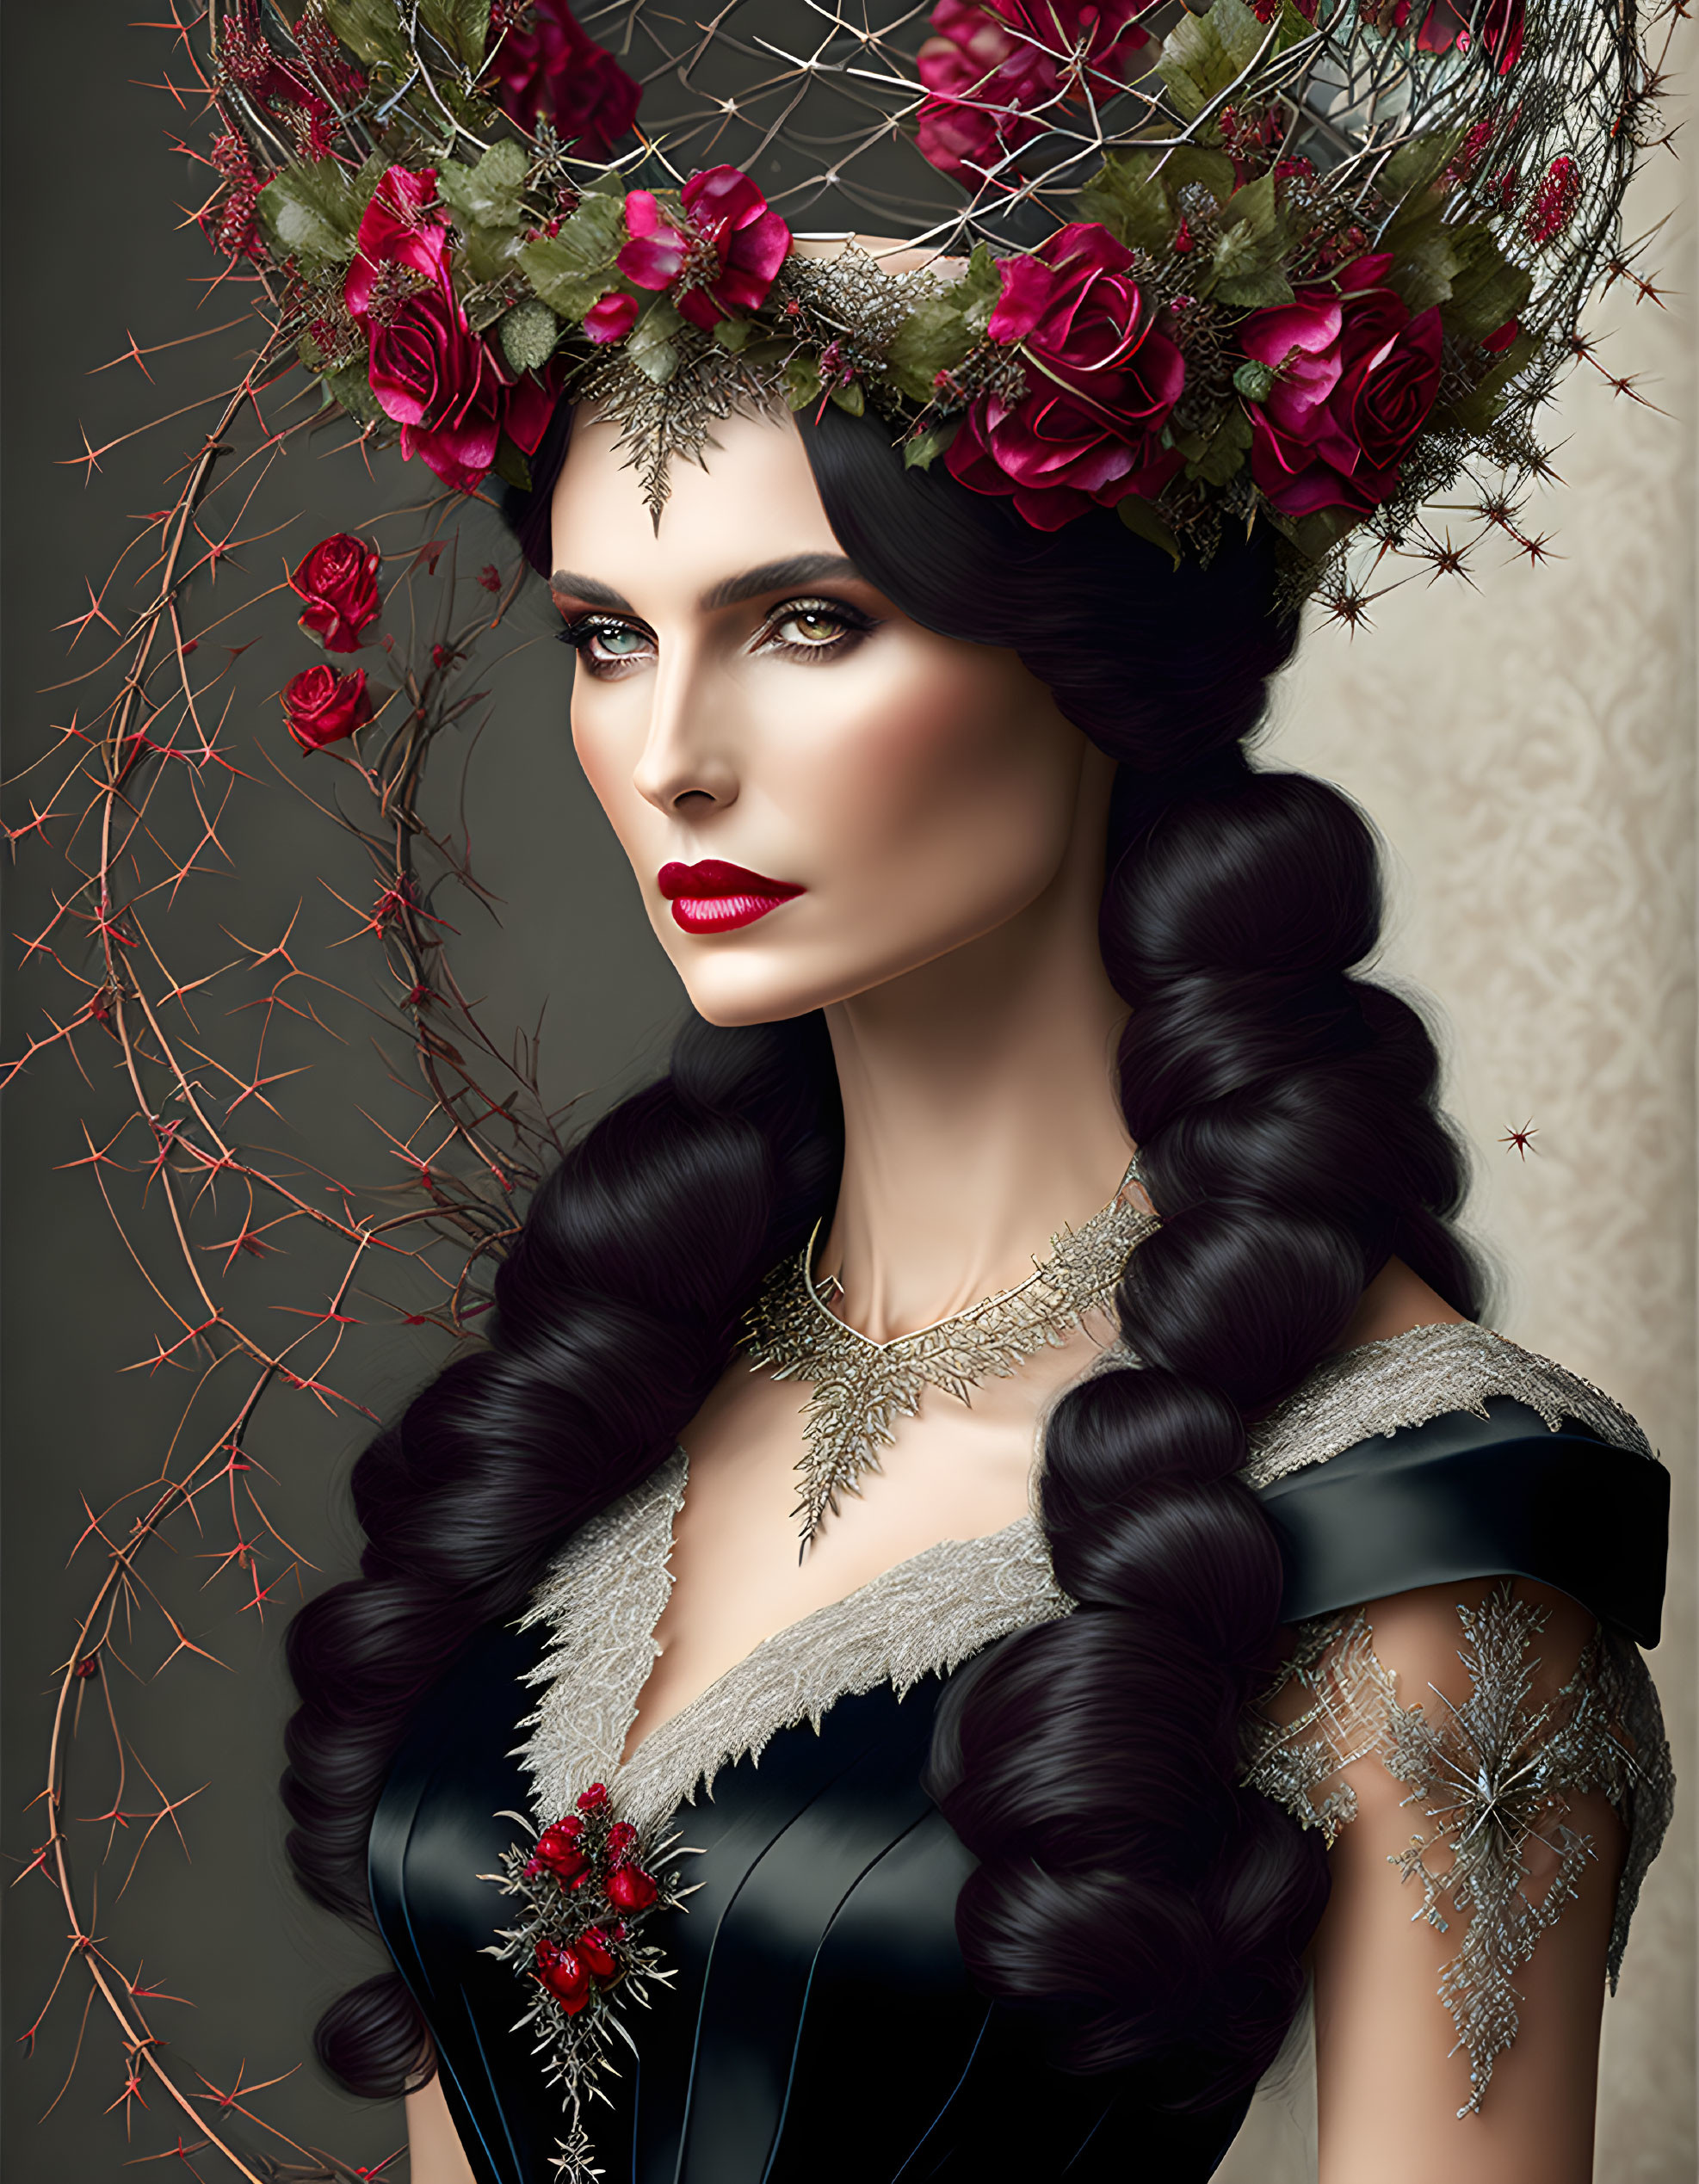 Woman with Floral Crown and Intricate Braid in Dark Lace Dress